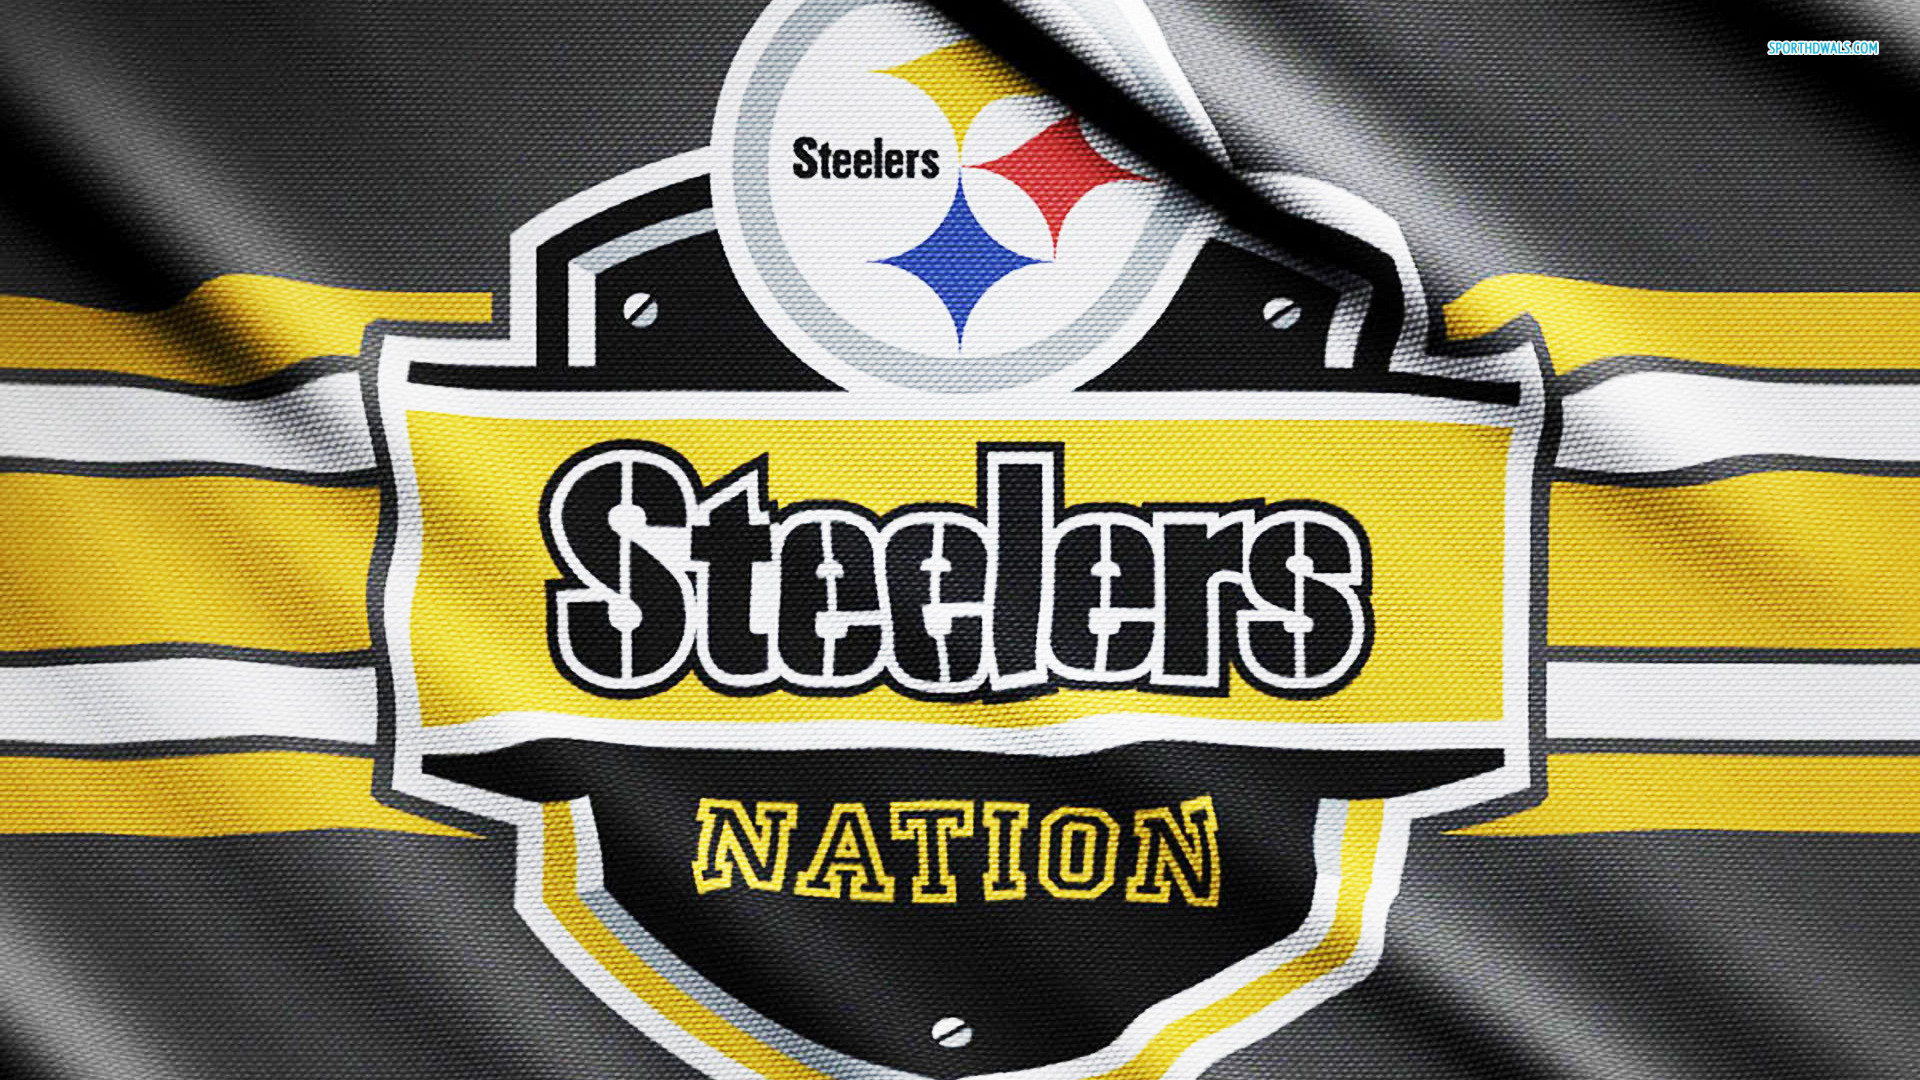 1920x1080 images pitssburgh steelers | Pittsburgh Steelers wallpaper 